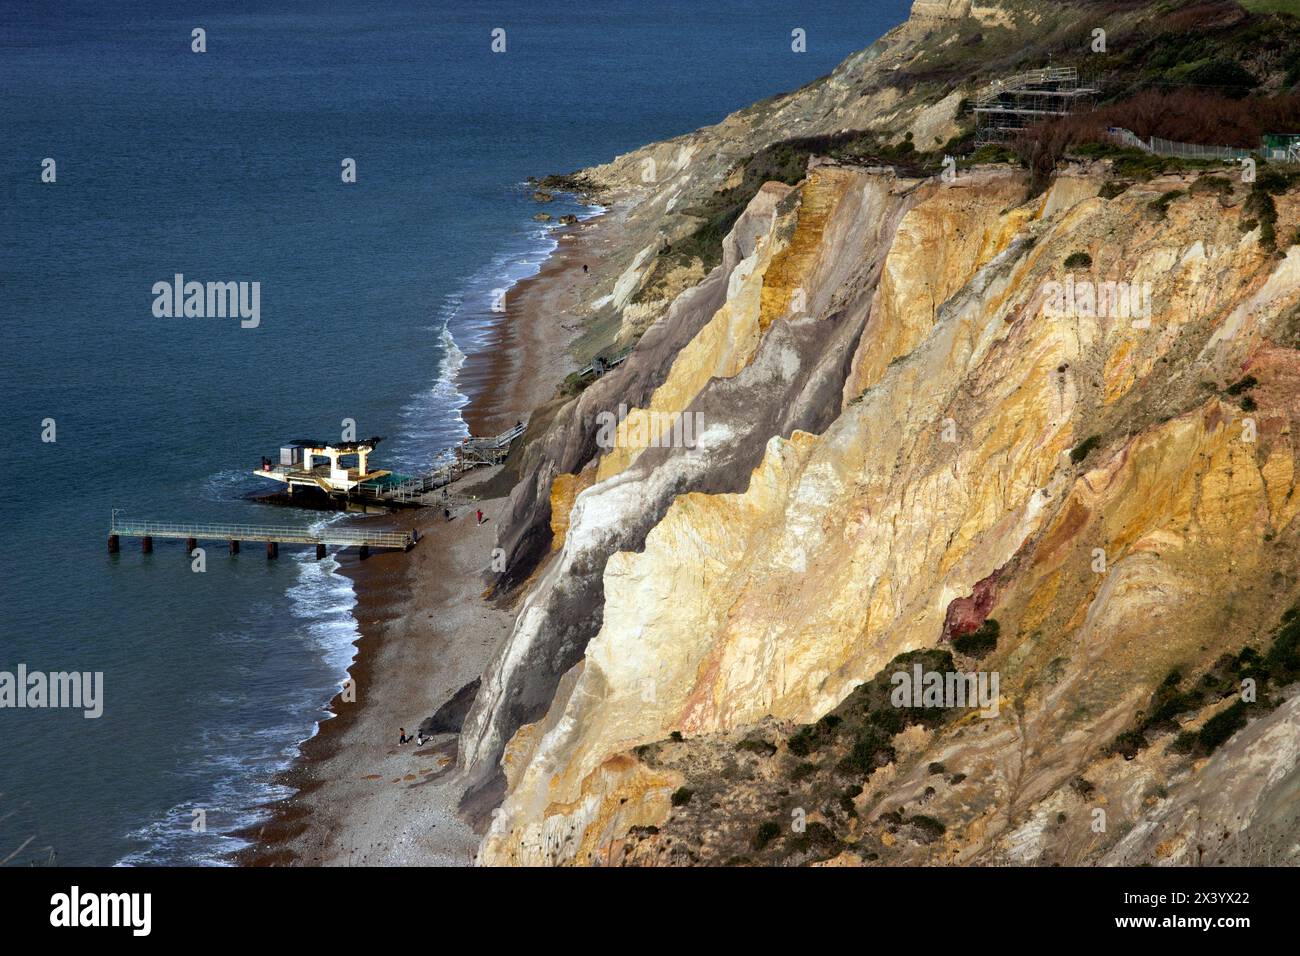 The multi-coloured sand cliffs of Alum Bay are a geological curiosity and tourist attraction on the west coast of the Isle of Wight, near the Needles. Stock Photo